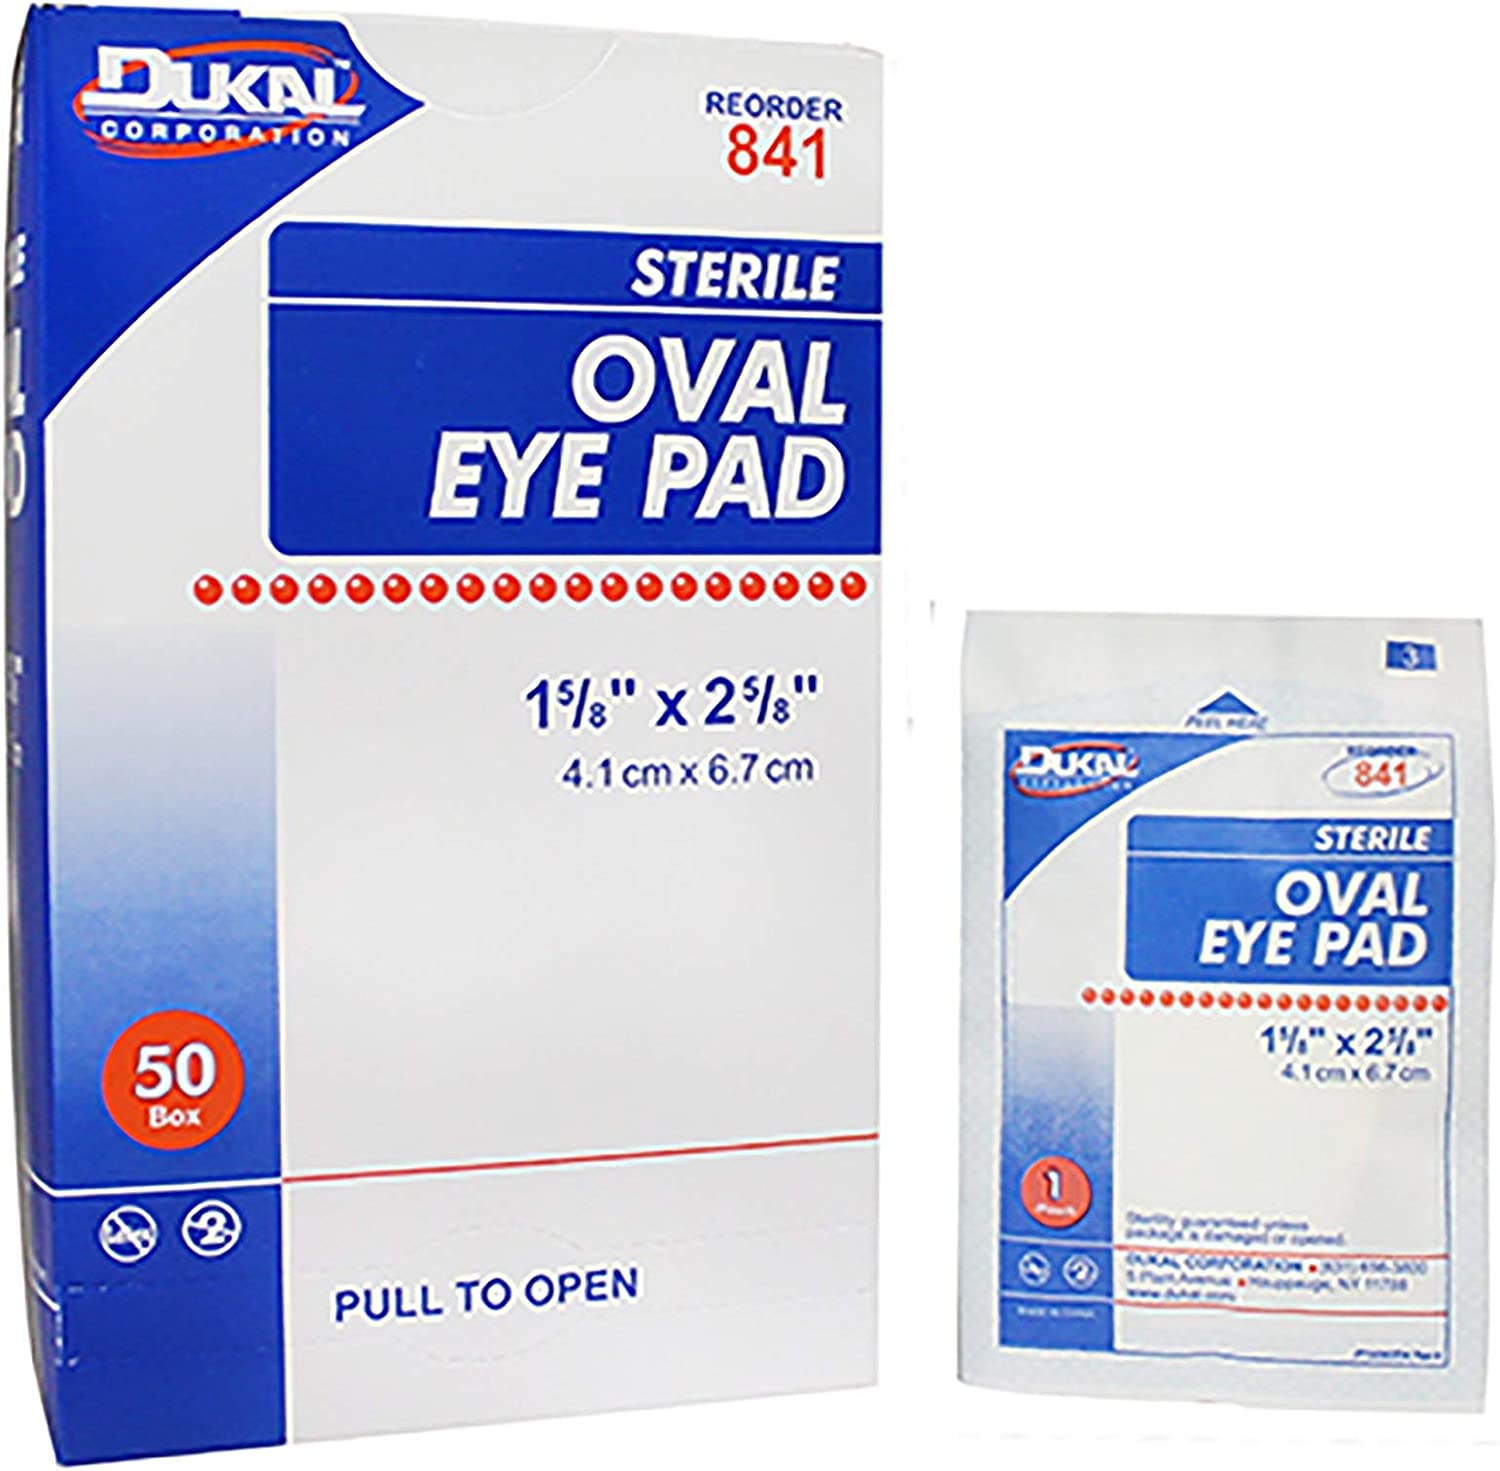 Dukal Oval Eye Pads 1 5/8 x 2 5/8. Pack of 50 Cotton Pads for Eyes. Absorbent Sterile Pads for Eye Protection. Easy Place tab. Individually Wrapped. Sealed Edges, 841